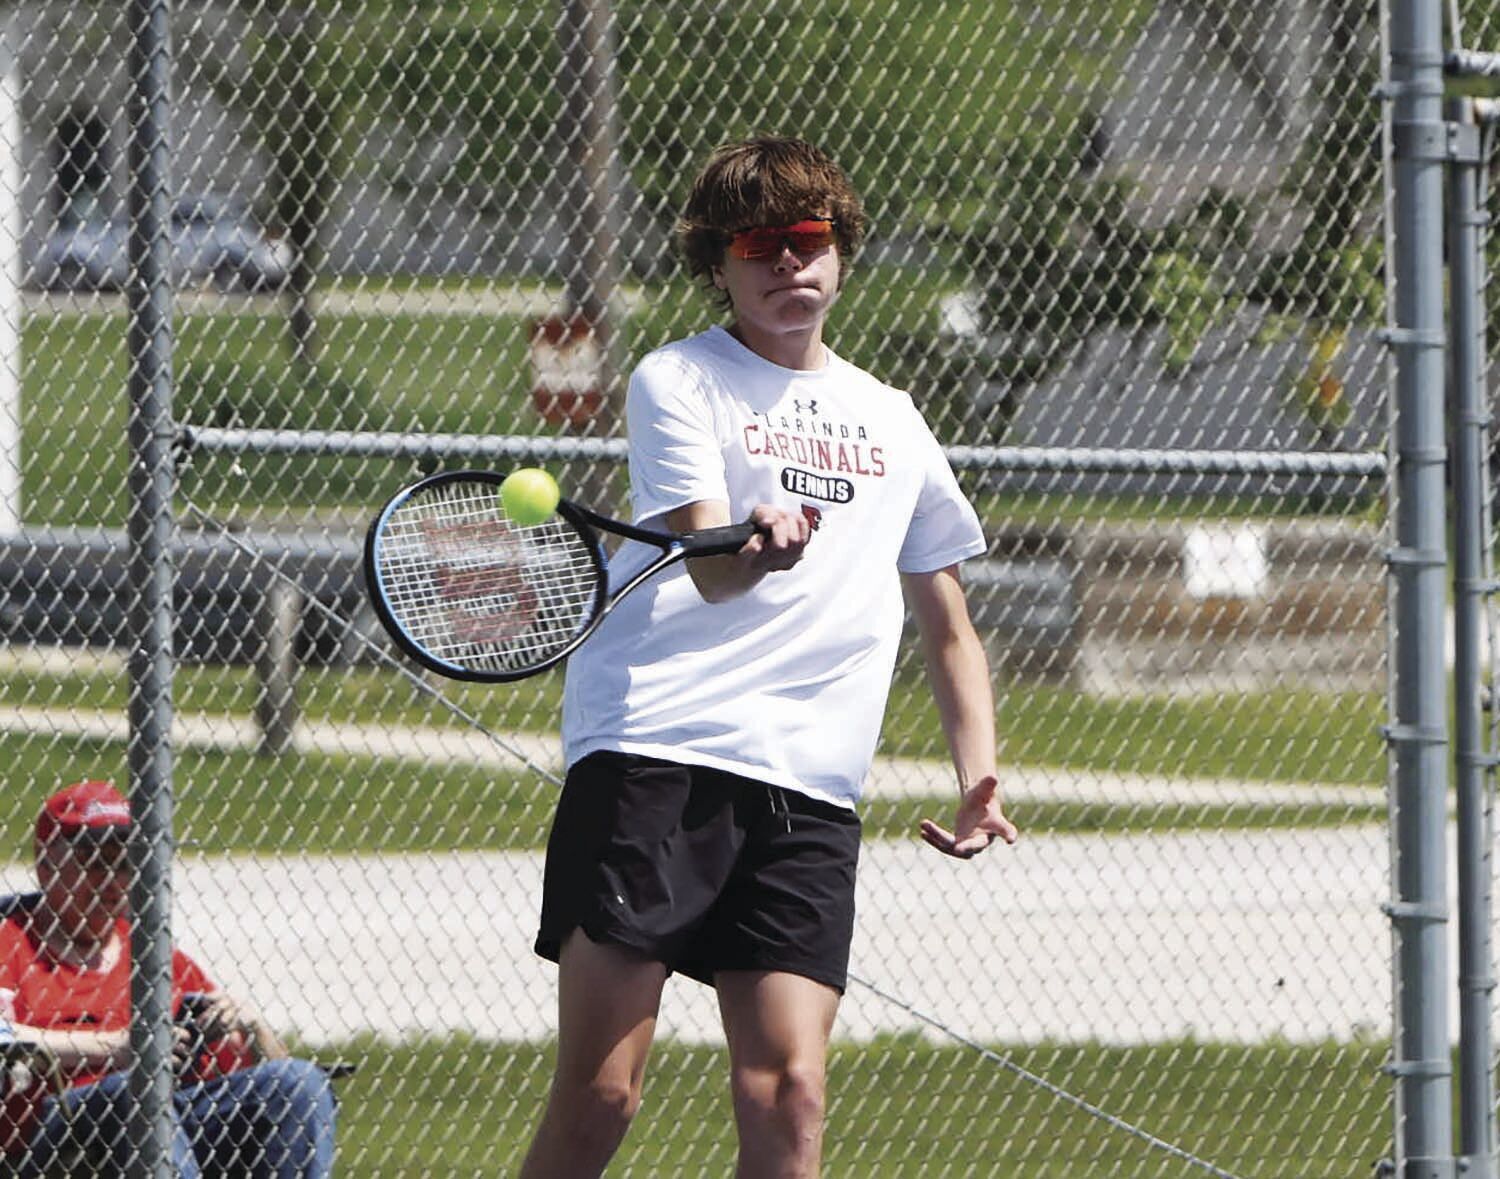 Clarinda’s Bird/Cox place 4th after semifinal appearance at district tennis